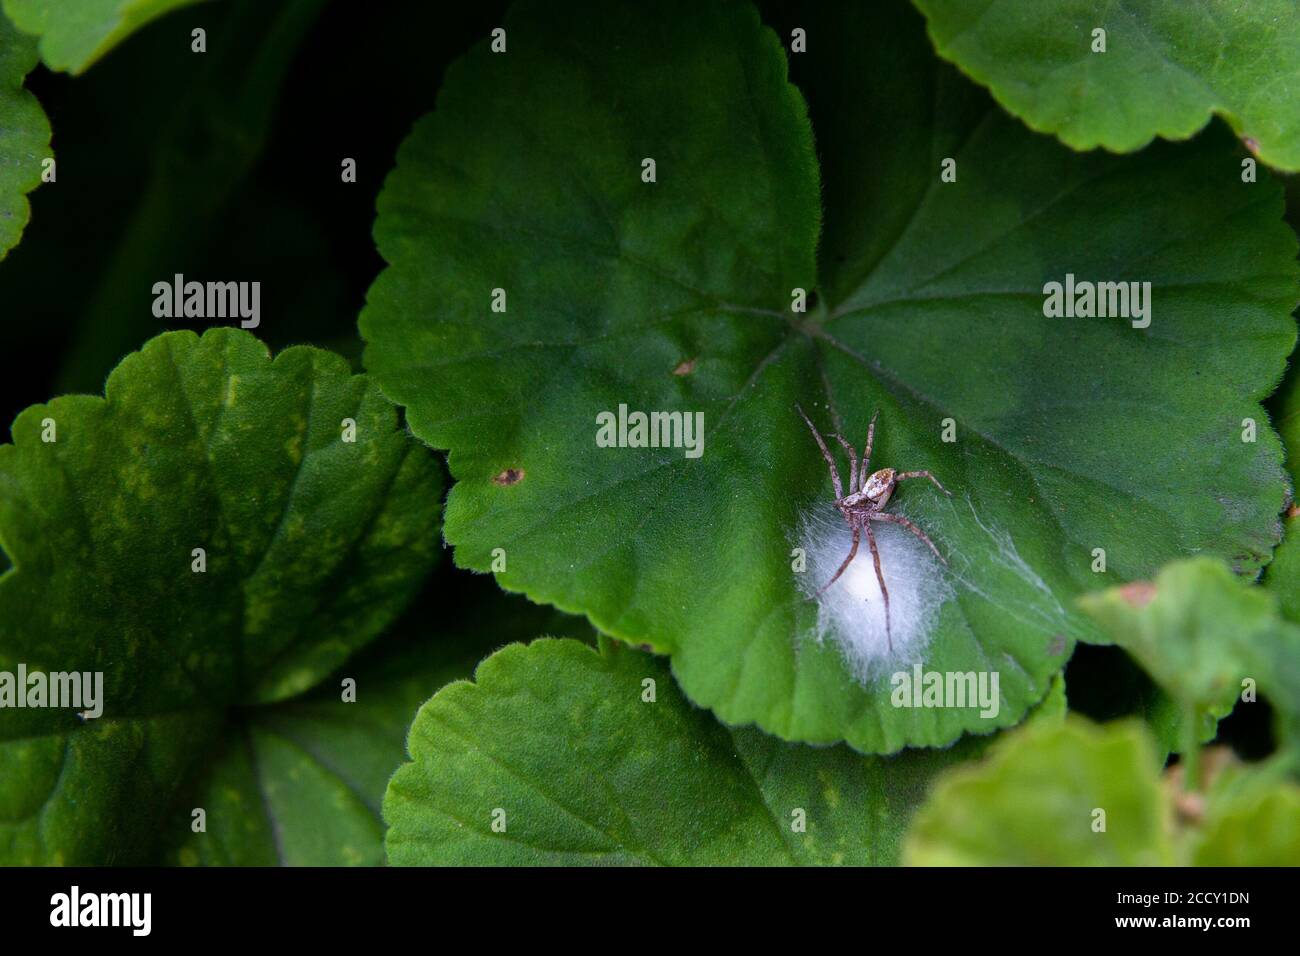 Close up shot of a spider on green geranium leaves protecting its white eggs in a web Stock Photo